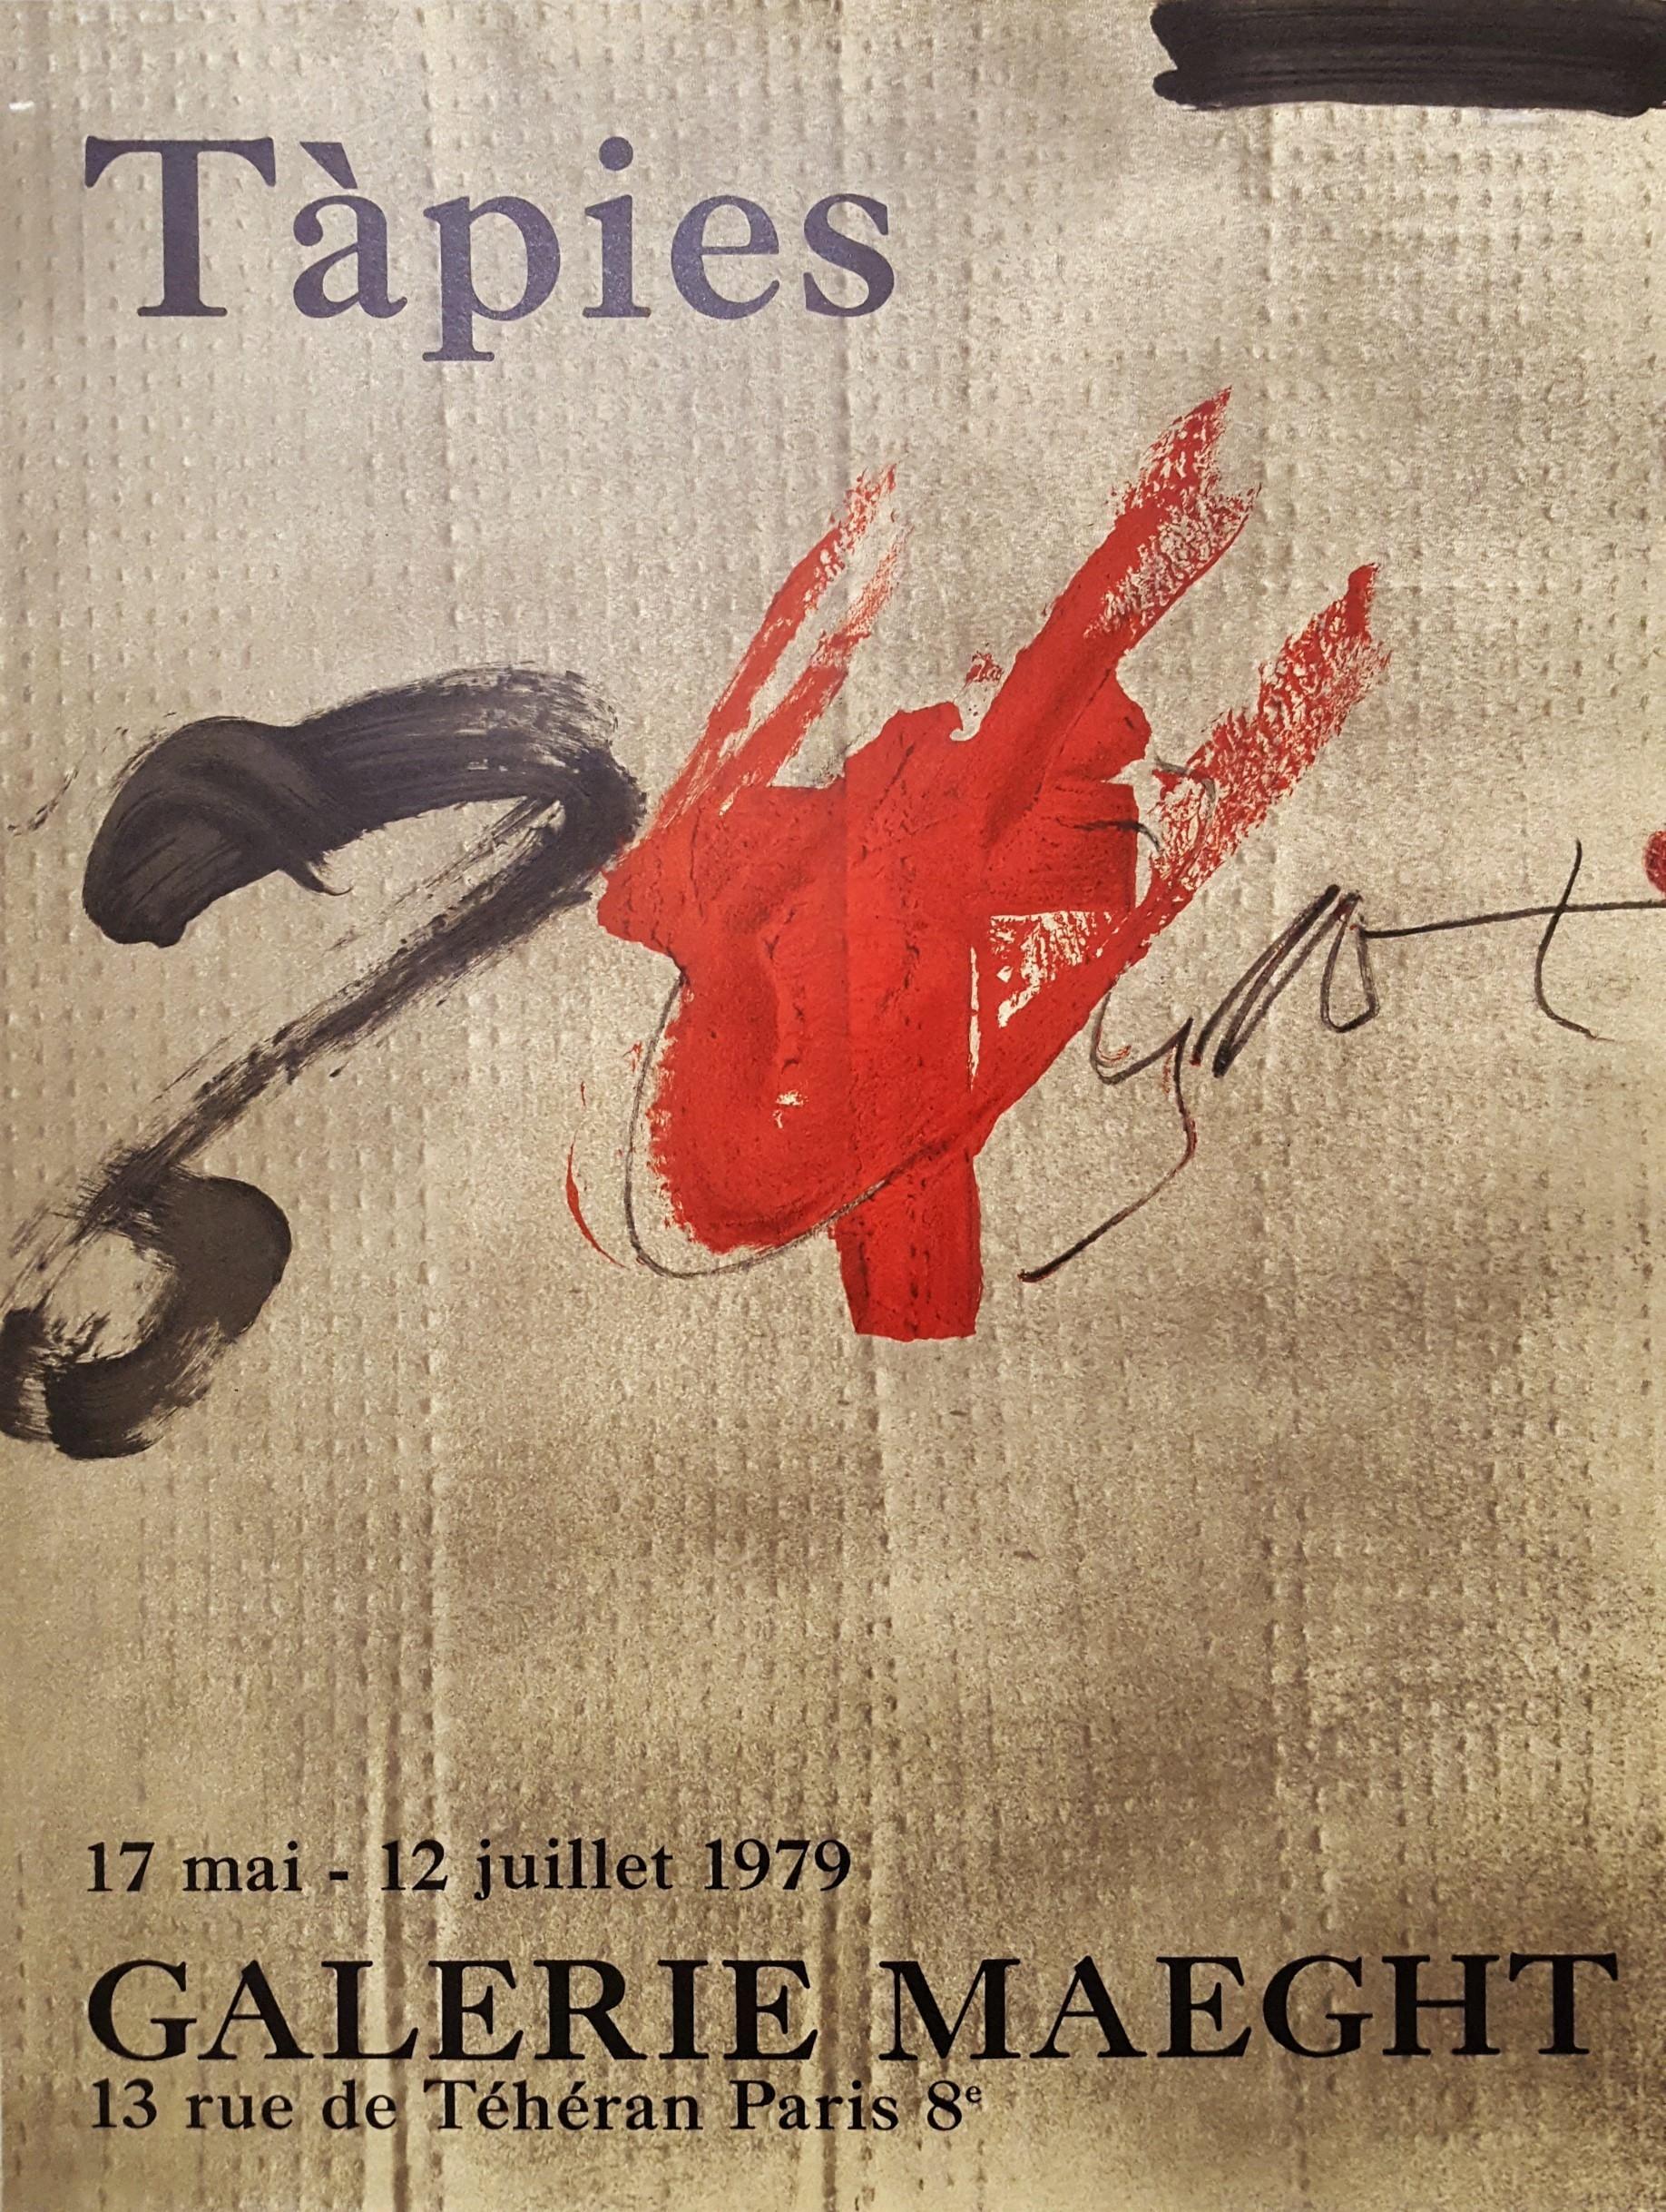 Antoni Tàpies Abstract Print - Galerie Maeght